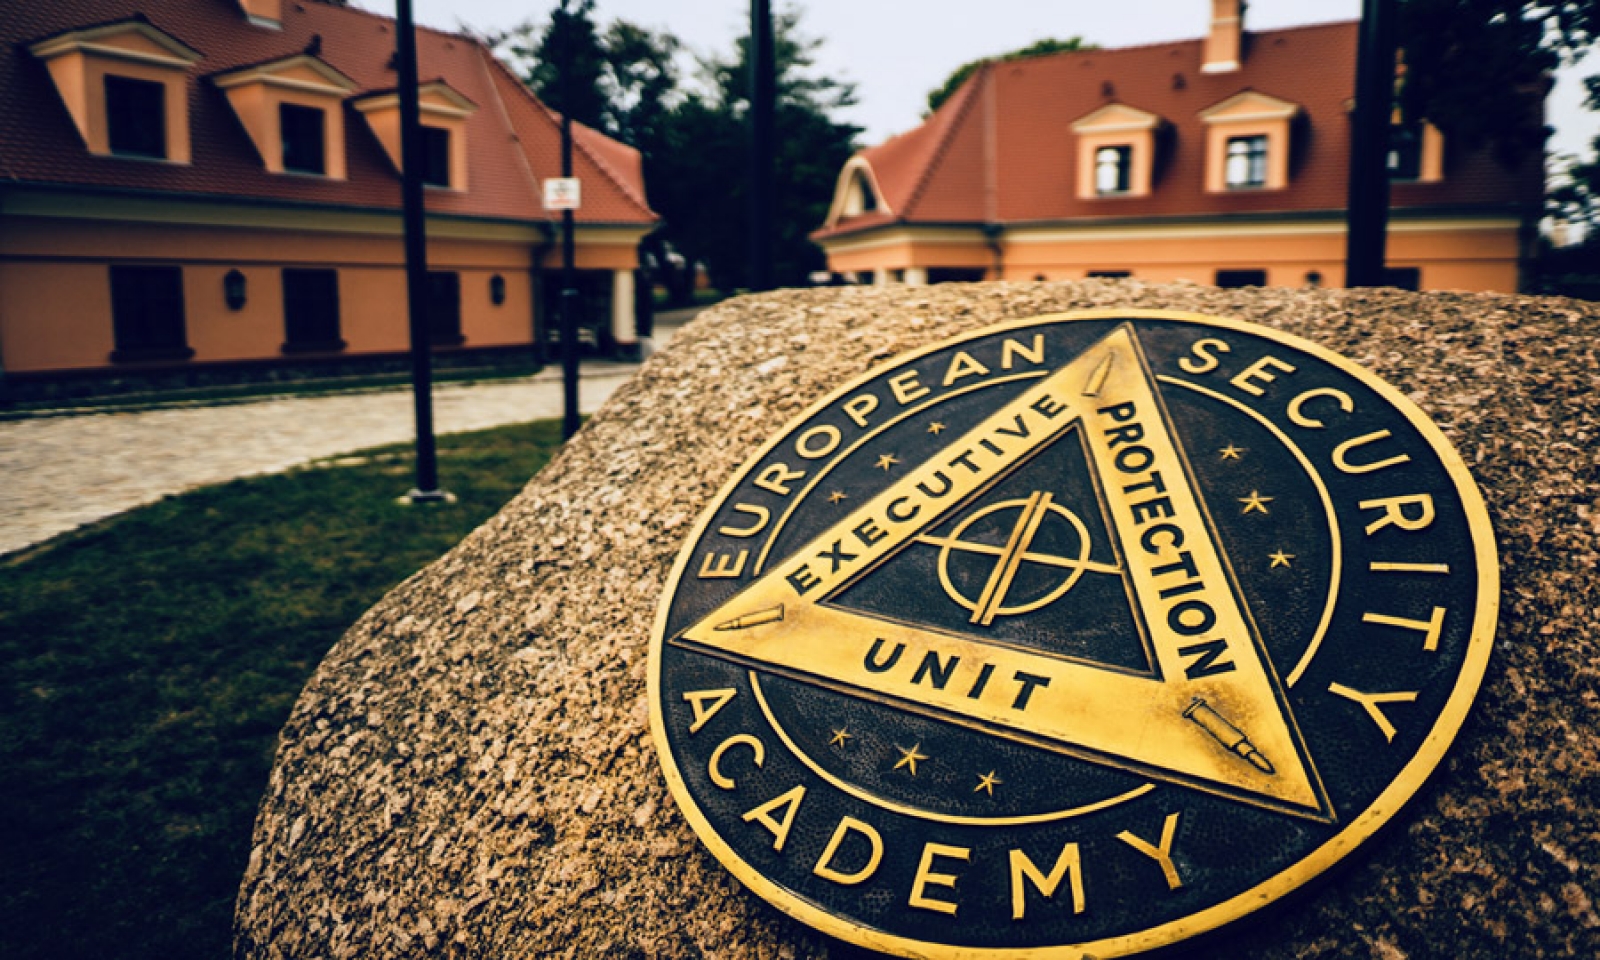 KNIGHTGUARD is closing Alliance with the EUROPEAN SECURITY ACADEMY - Switzerland in 2019